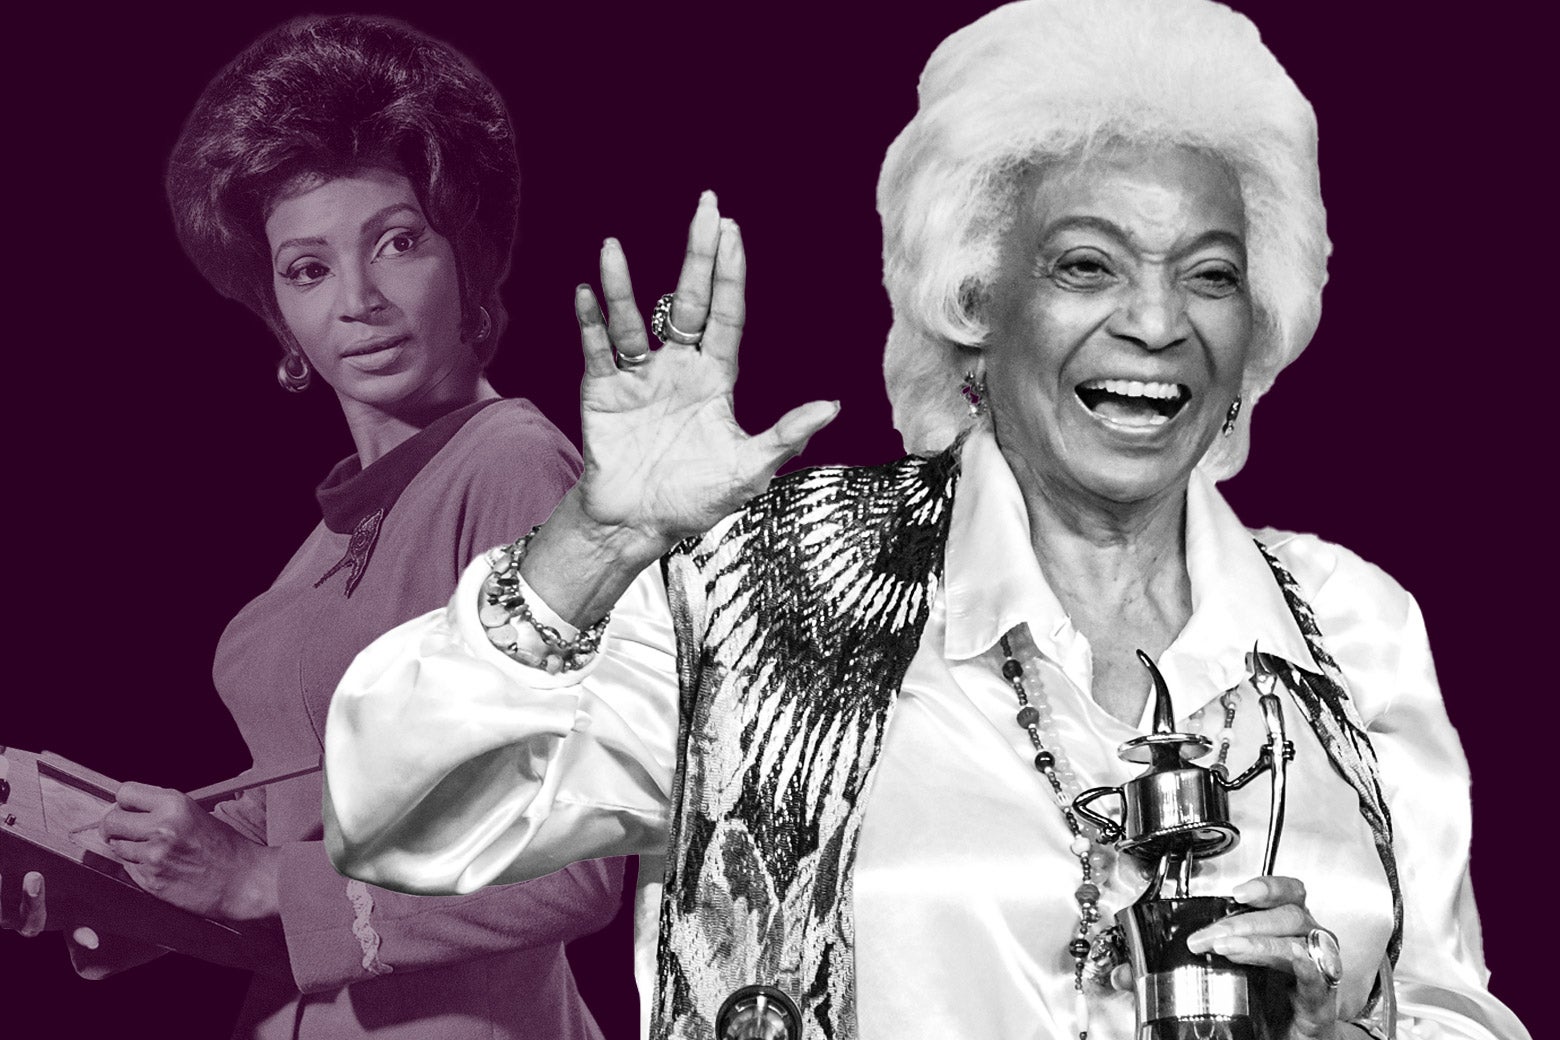 In the foreground, a white-haired Nichelle Nichols holds a statuette and raises her hand in a Vulcan salute. In the background, a young Nichelle Nichols in costume as Lieutenant Uhura.